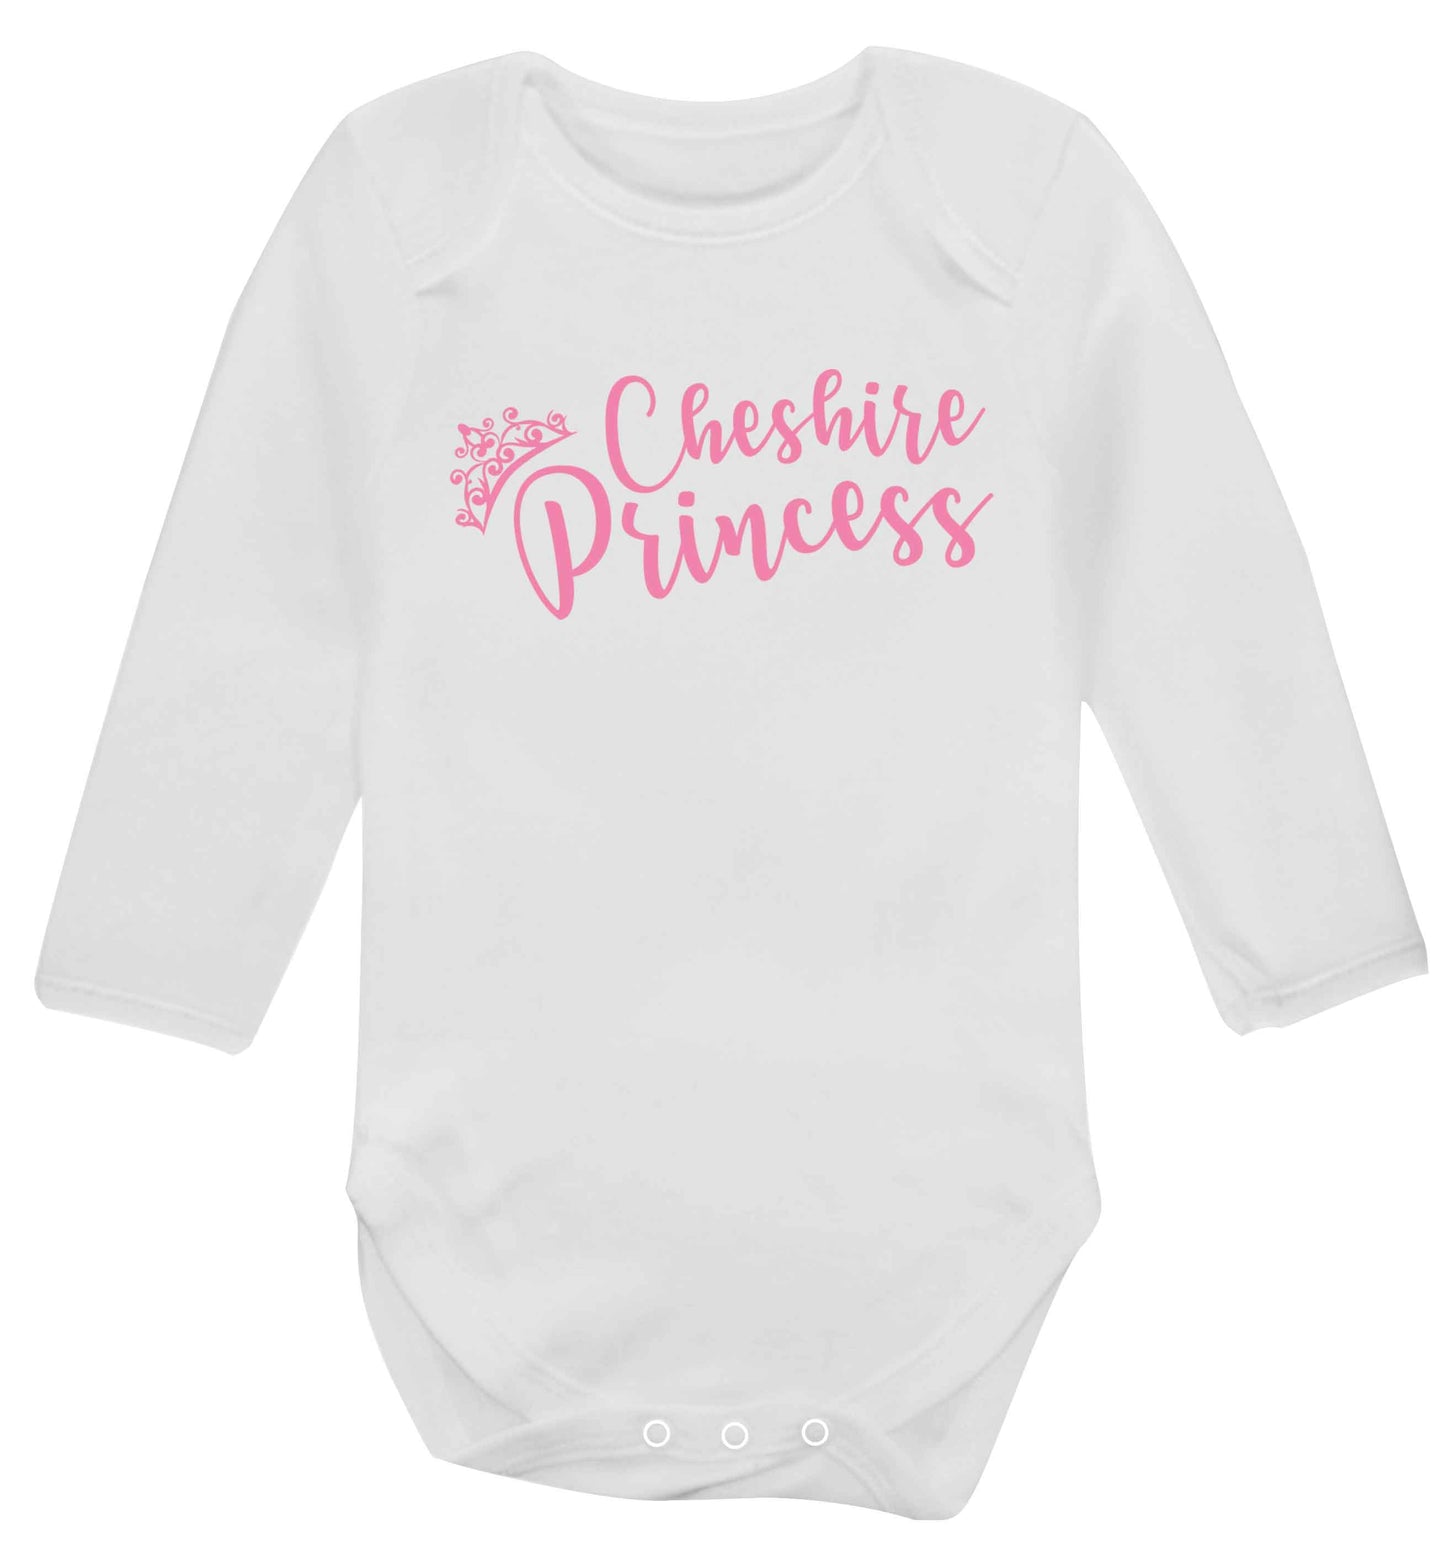 Cheshire princess Baby Vest long sleeved white 6-12 months